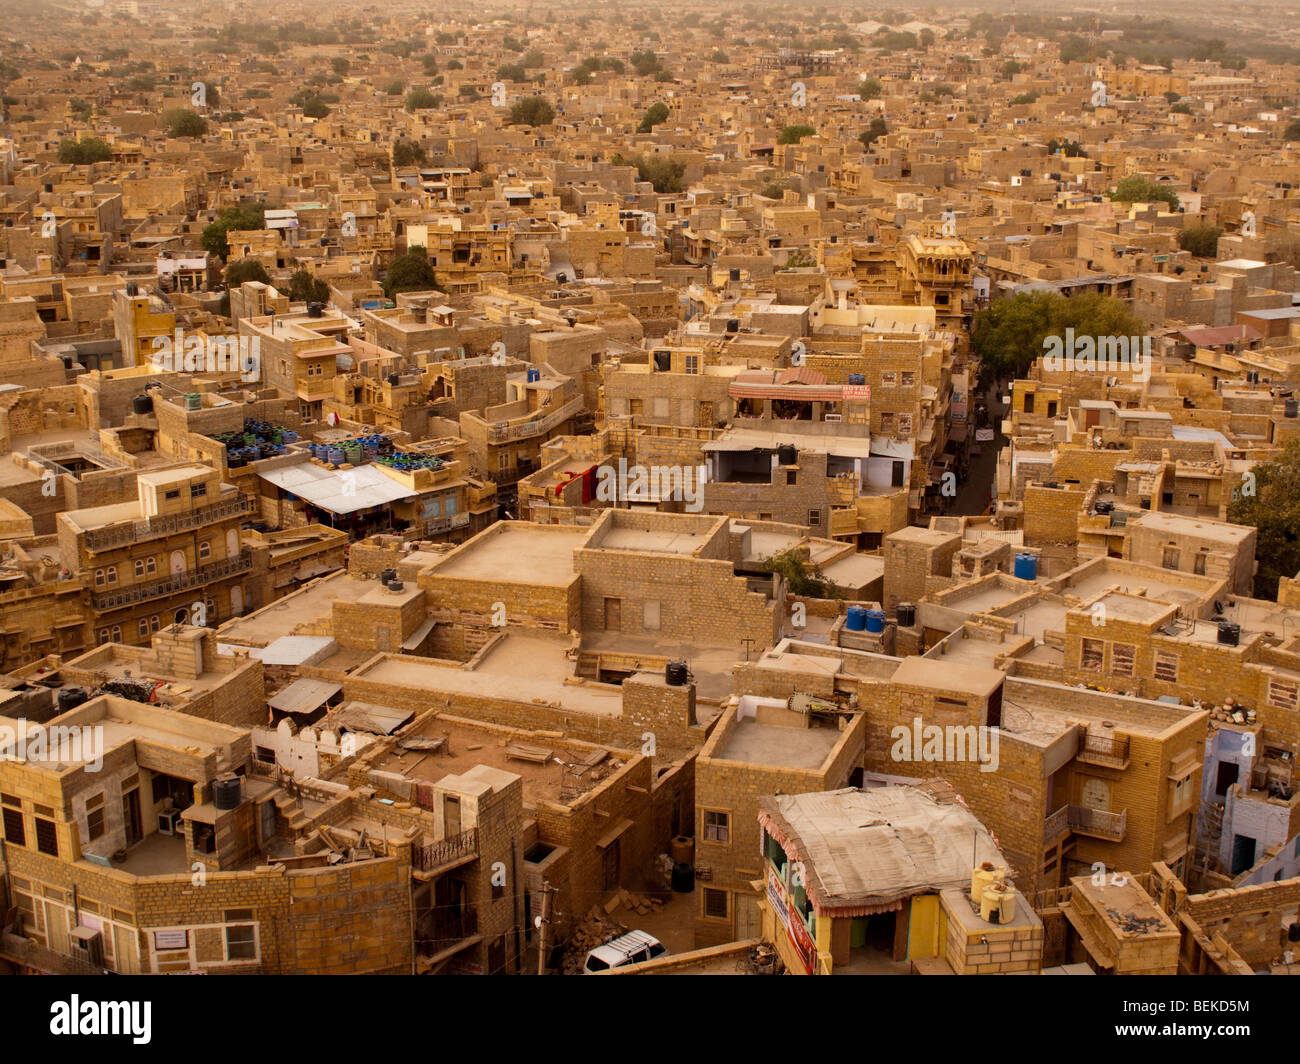 JAISALMER, INDIA: A view from above of the yellow sandstone buildings of Jaisalmer which have lead to it being known as The Gold Stock Photo